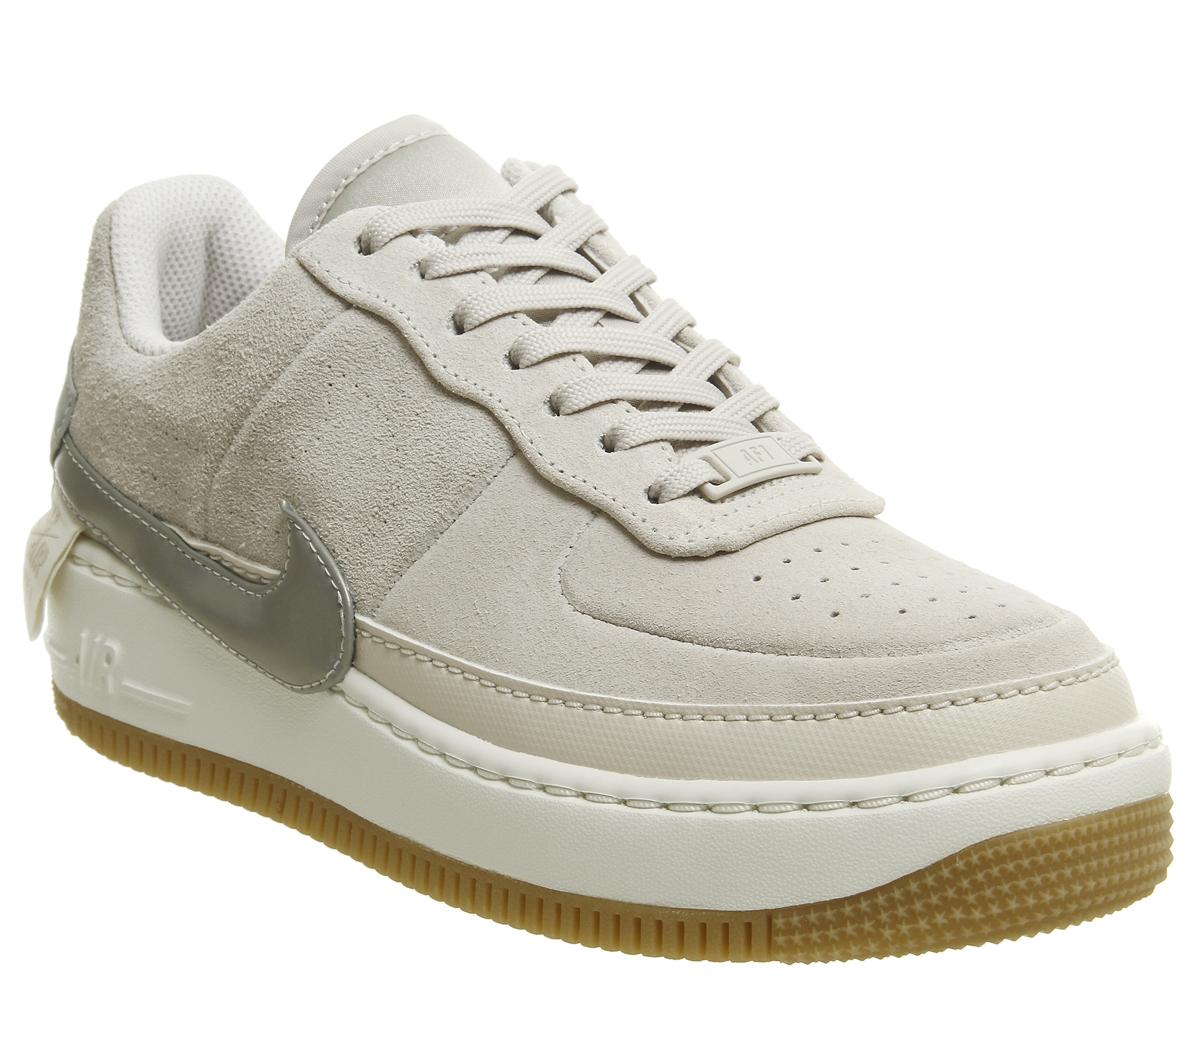 Nike Air Force 1 Jester Trainers Desert 